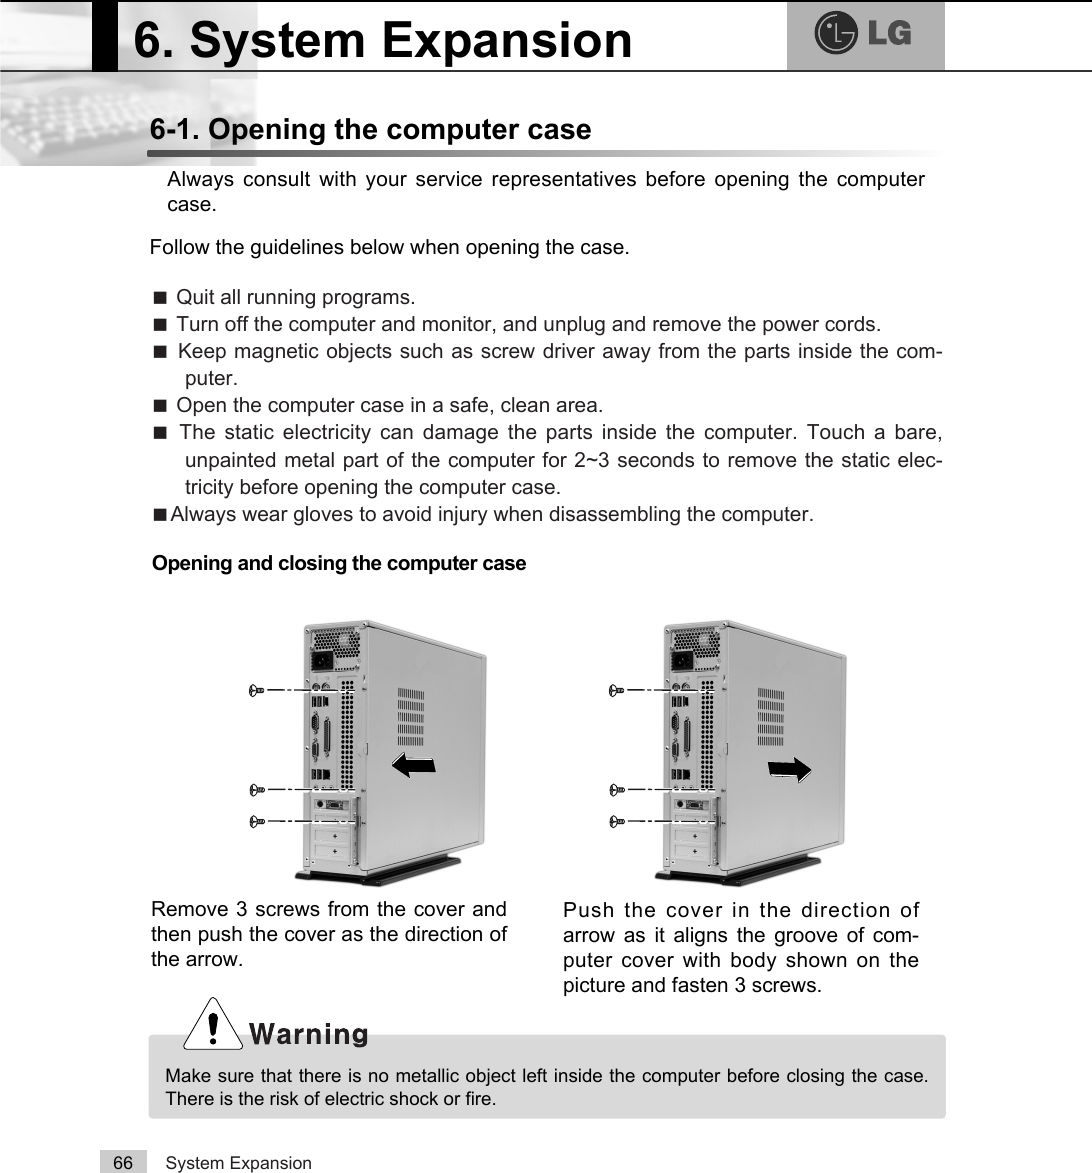 System Expansion666-1. Opening the computer caseAlways consult with your service representatives before opening the computercase.Follow the guidelines below when opening the case.Opening and closing the computer caseãQuit all running programs.ãTurn off the computer and monitor, and unplug and remove the power cords.ãKeep magnetic objects such as screw driver away from the parts inside the com-puter.ãOpen the computer case in a safe, clean area.ãThe static electricity can damage the parts inside the computer. Touch a bare,unpainted metal part of the computer for 2~3 seconds to remove the static elec-tricity before opening the computer case.ãAlways wear gloves to avoid injury when disassembling the computer.Make sure that there is no metallic object left inside the computer before closing the case.There is the risk of electric shock or fire.6. System ExpansionRemove 3 screws from the cover andthen push the cover as the direction ofthe arrow.Push the cover in the direction ofarrow as it aligns the groove of com-puter cover with body shown on thepicture and fasten 3 screws.